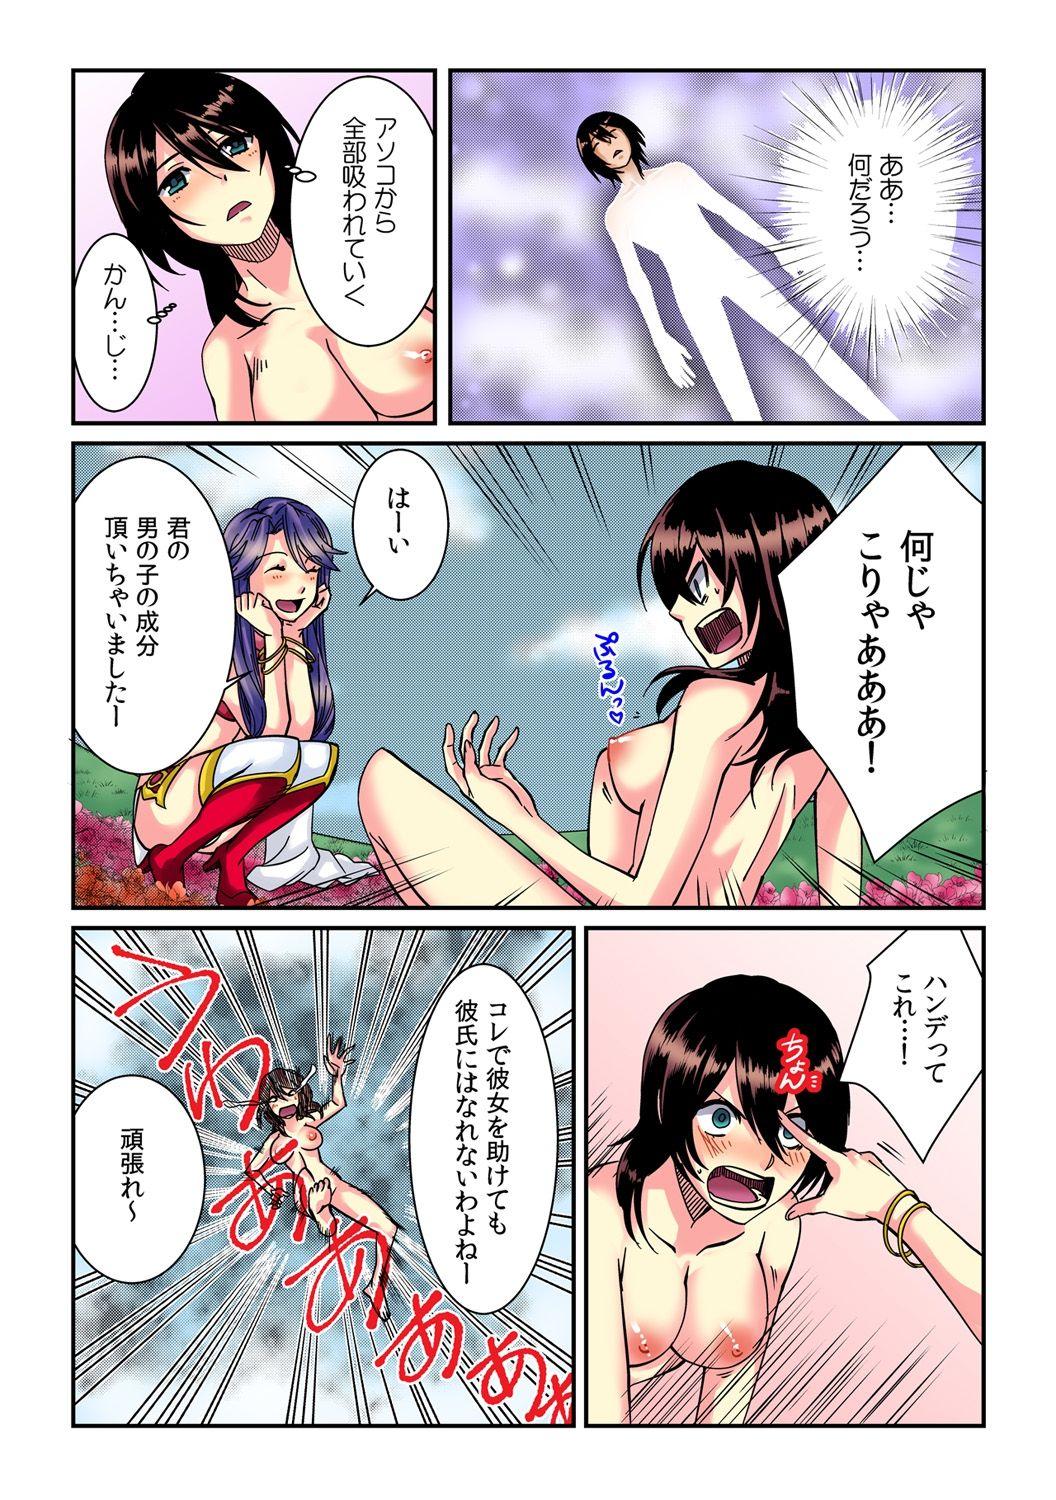 [Akagi Gijou / Akahige] I became a girl- and I definitely can't let anyone find out! (Full color) 1 11